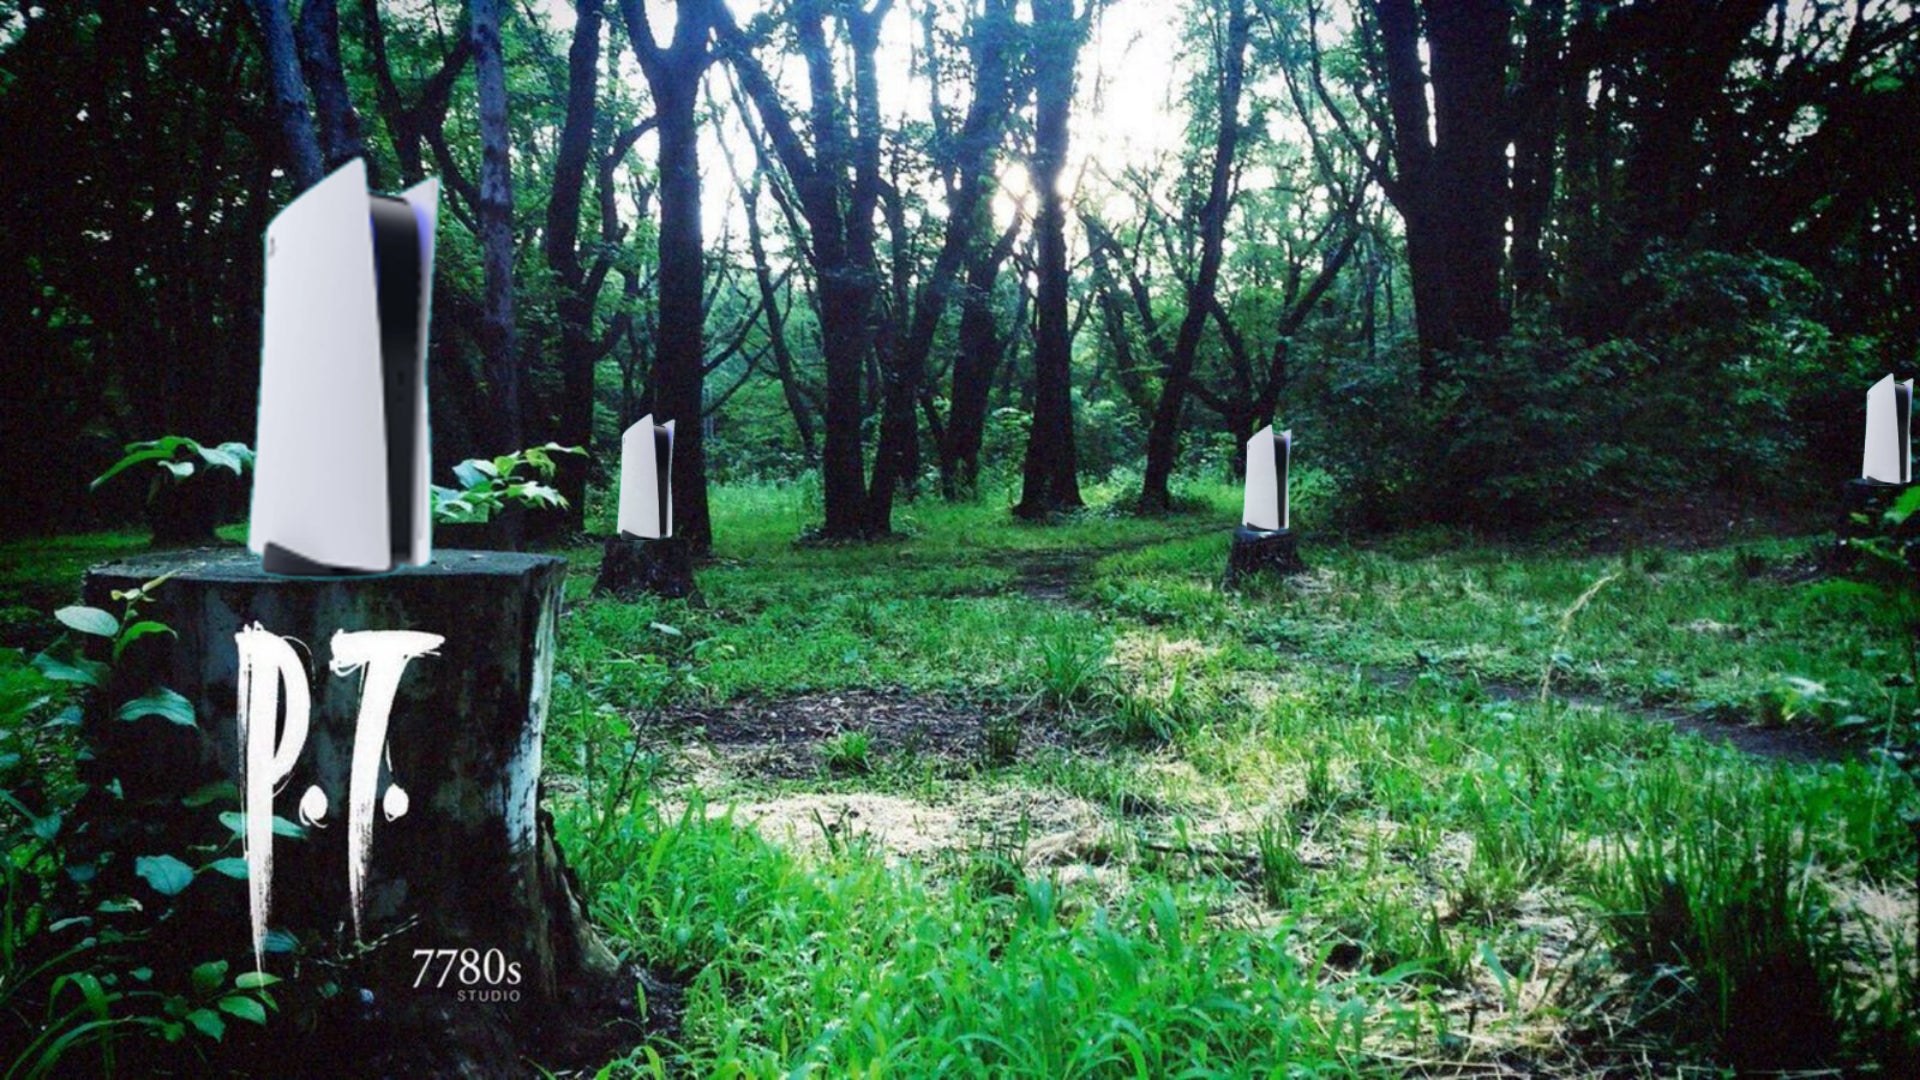 Multiple PS5 consoles hide in the forest featured in the P.T. artwork